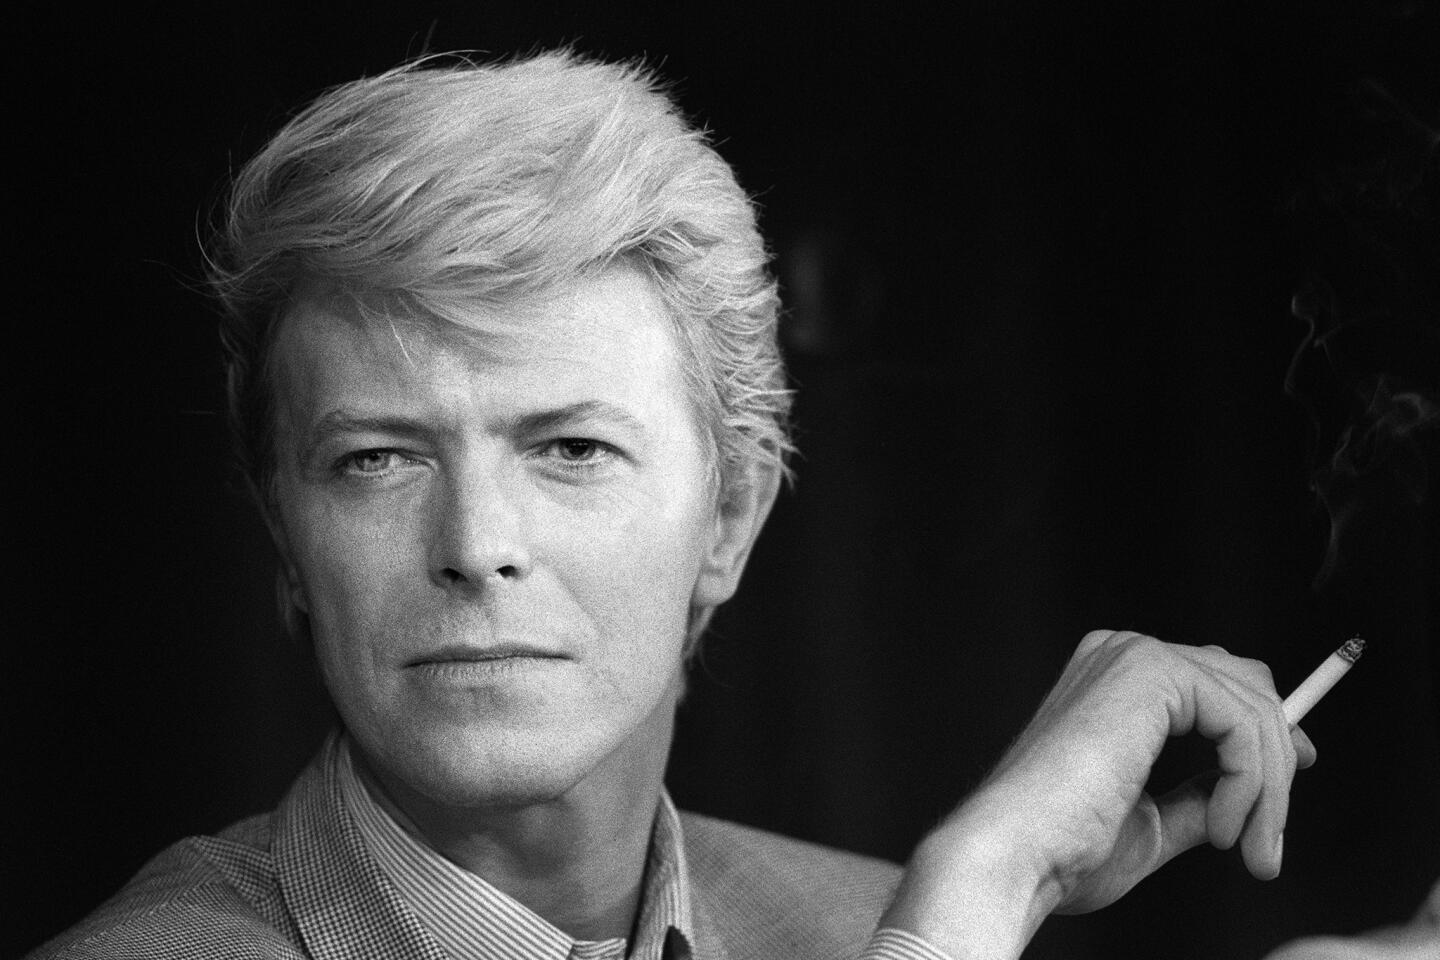 David Bowie: The Man Who Changed the (Music) World (1947-2016